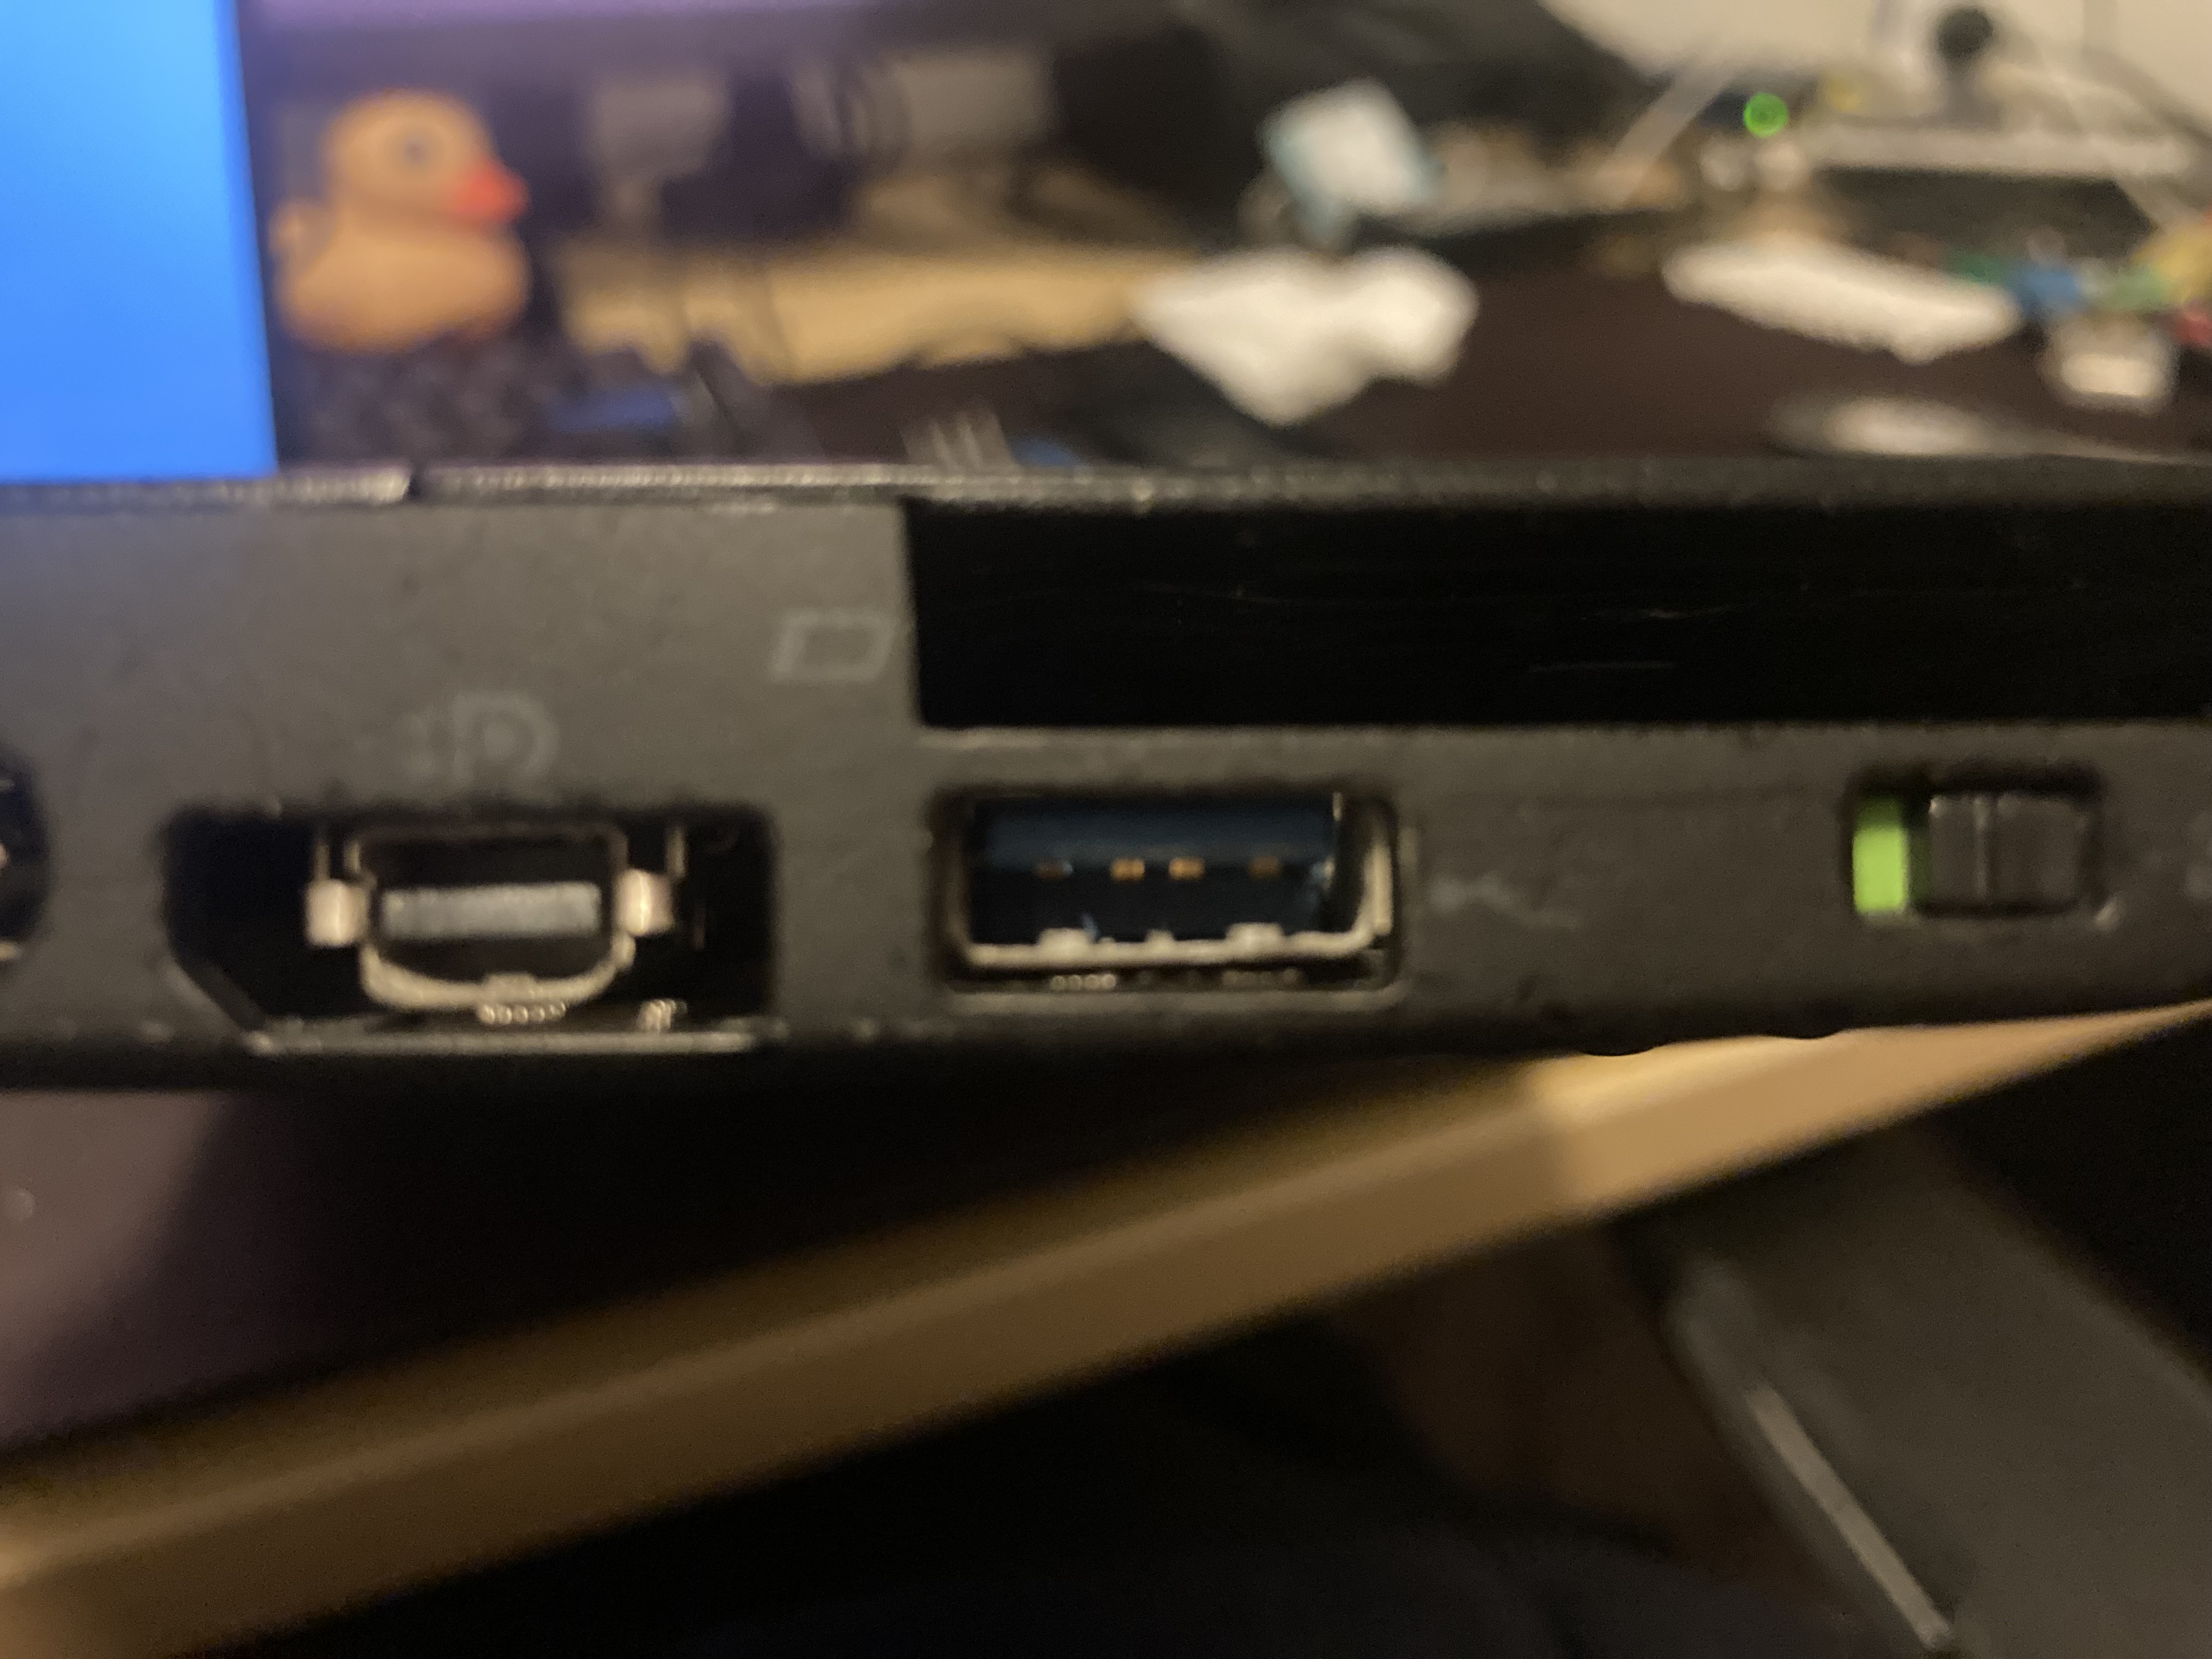 A USB port which doens't line
up with the cut out in the chassis properly